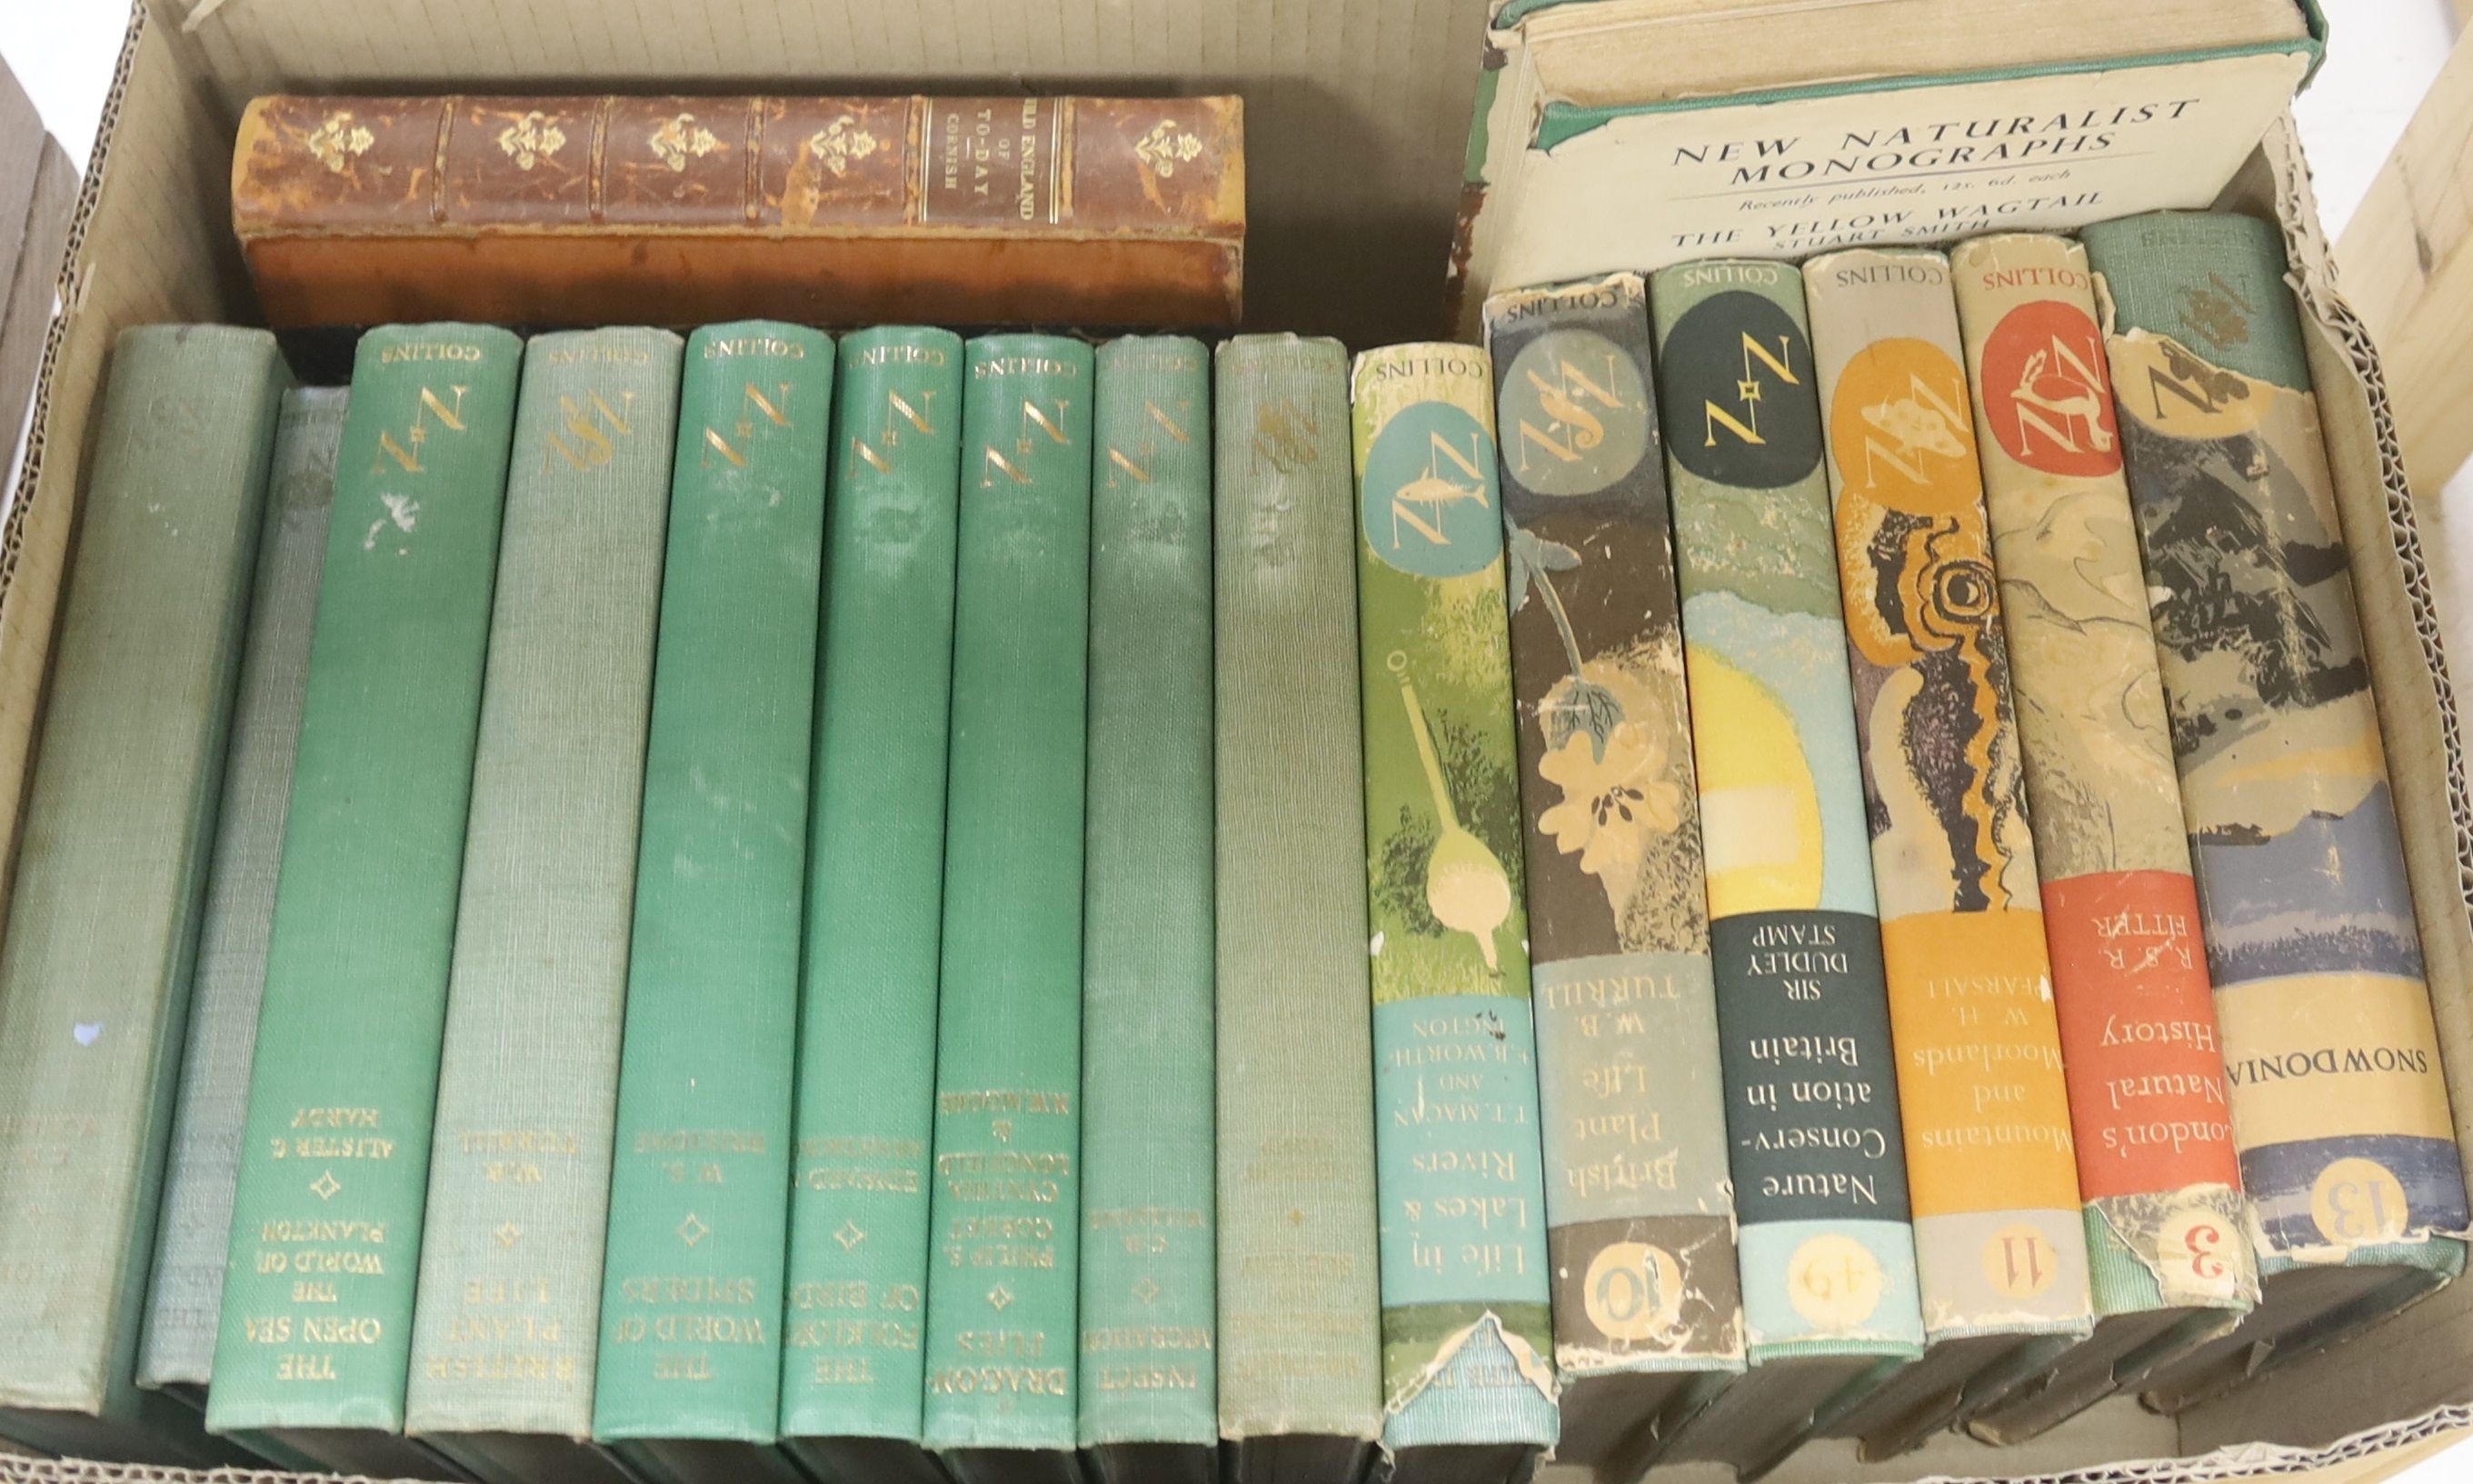 Ornithology and Natural History - A miscellany of approximately 33 volumes, in 2 boxes